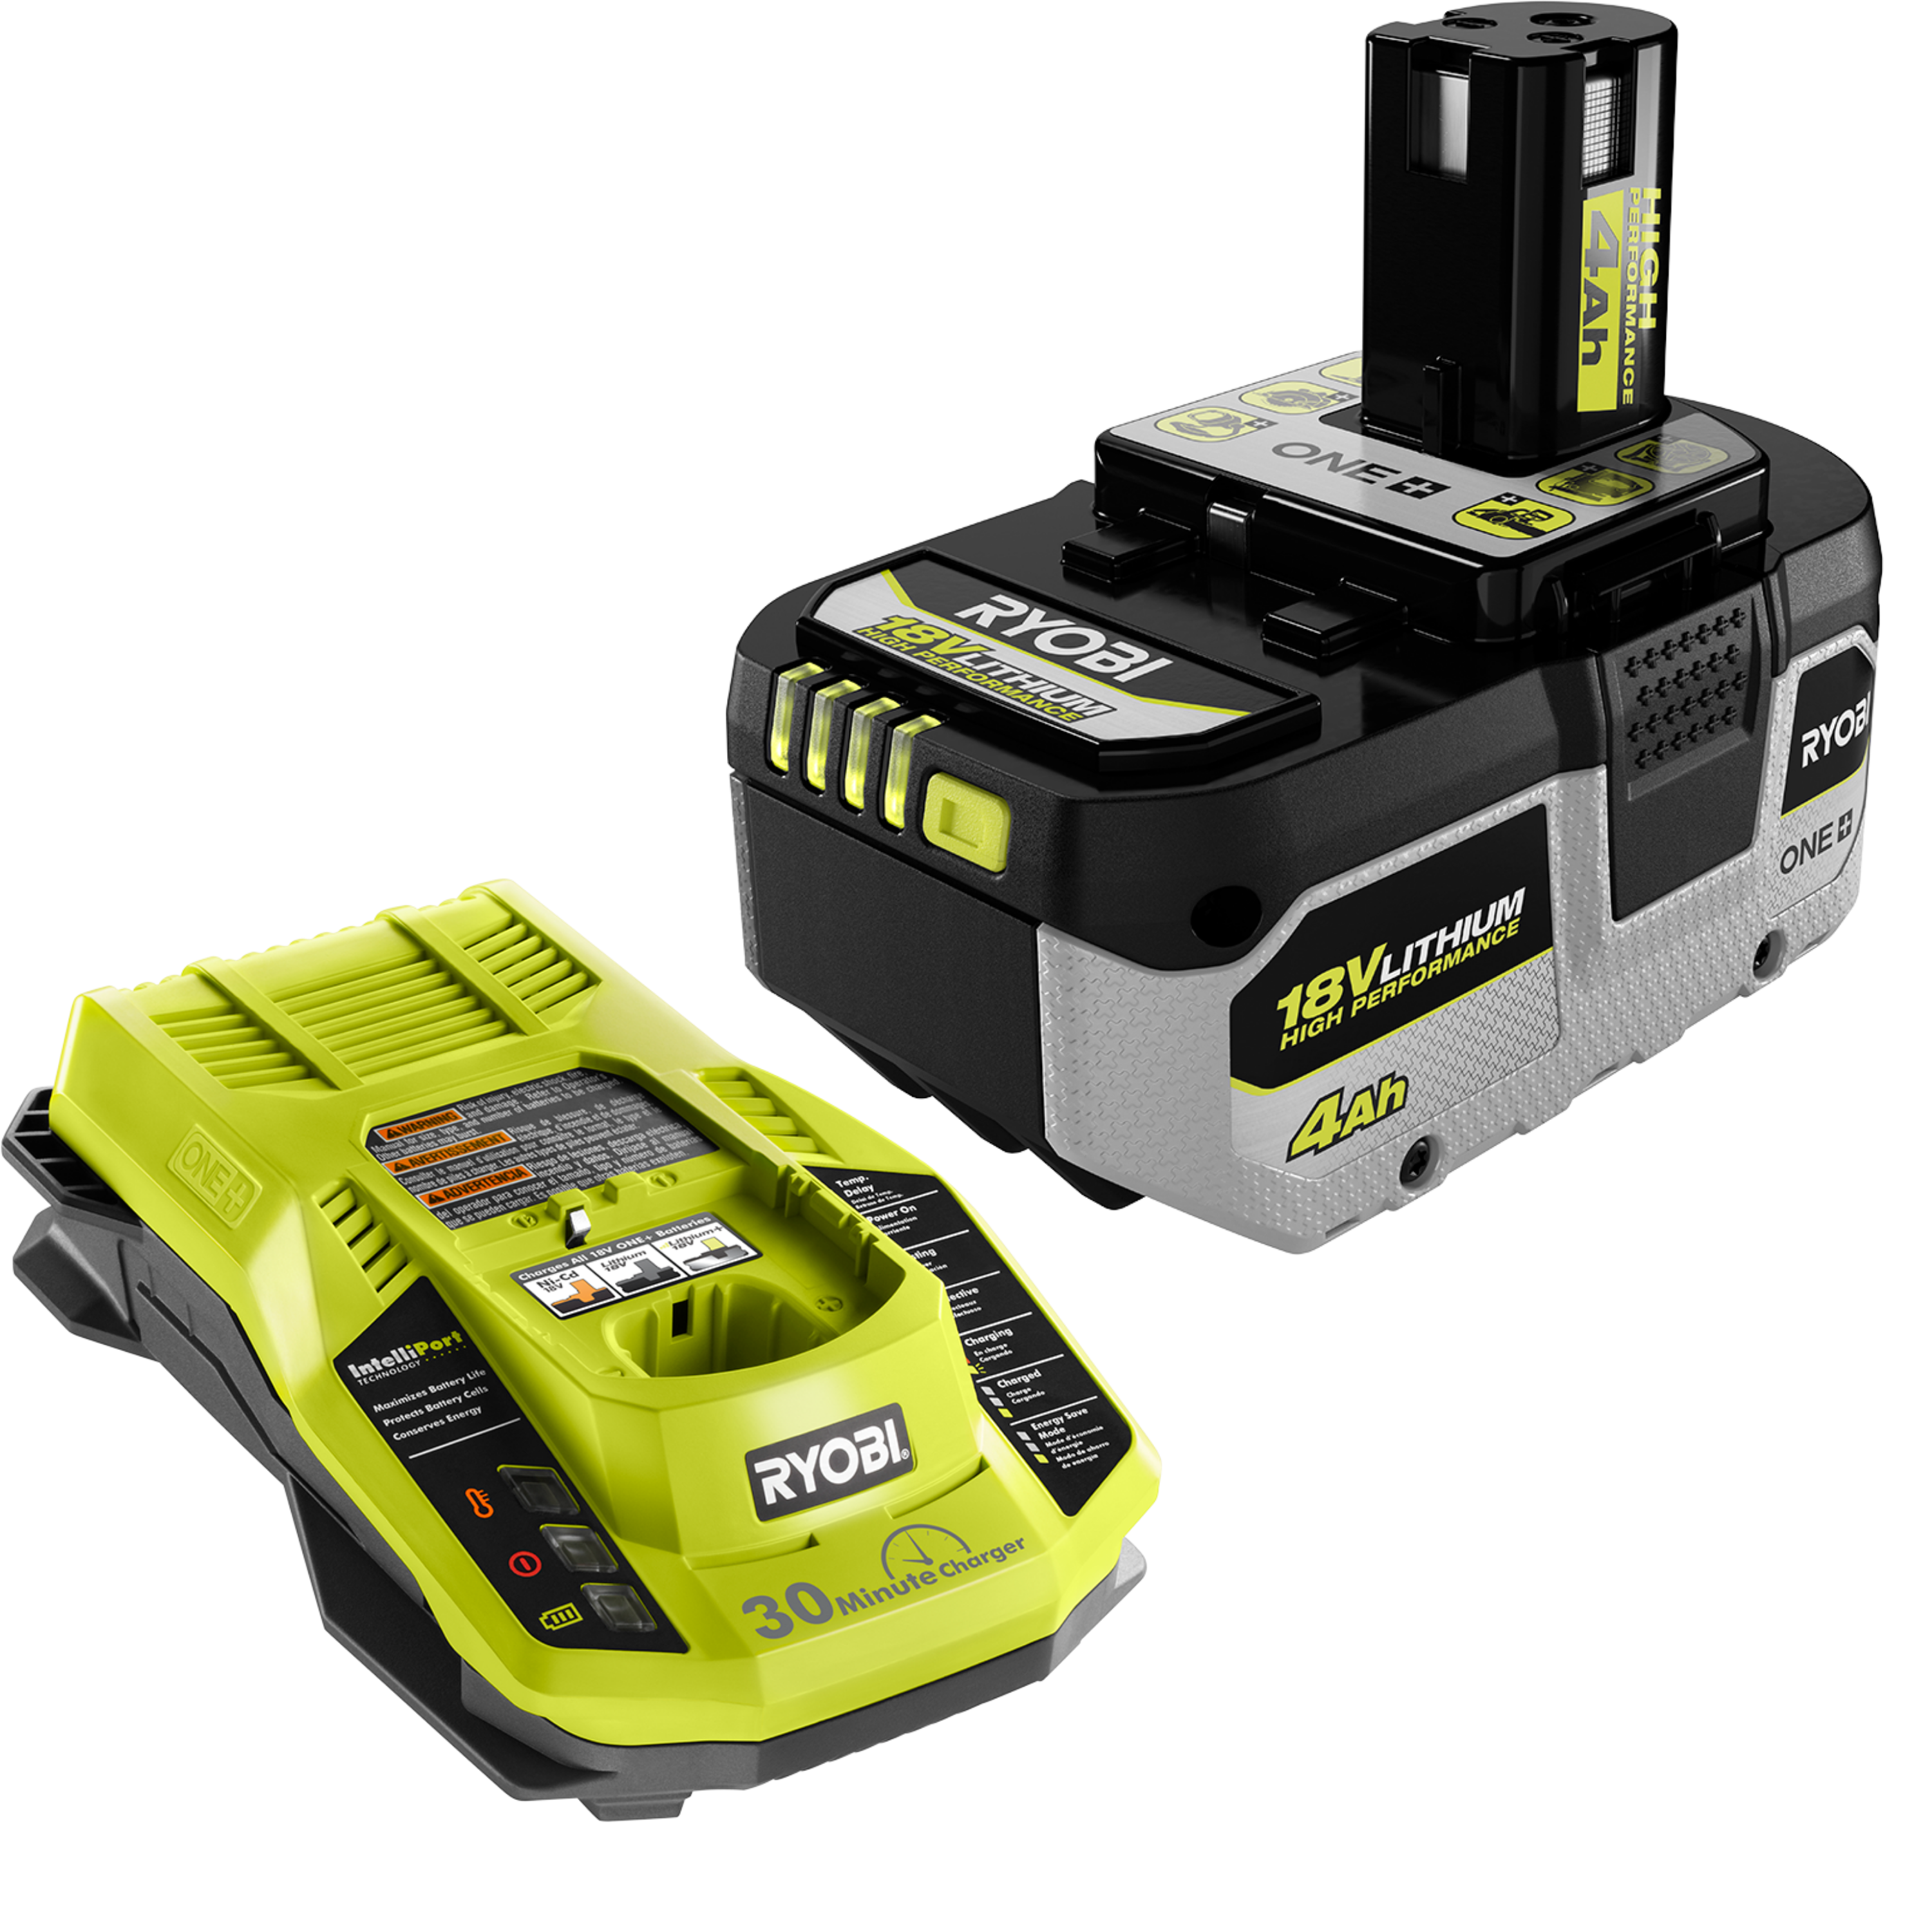 18V ONE+ HP 6.0Ah Battery and Charger Starter Kit